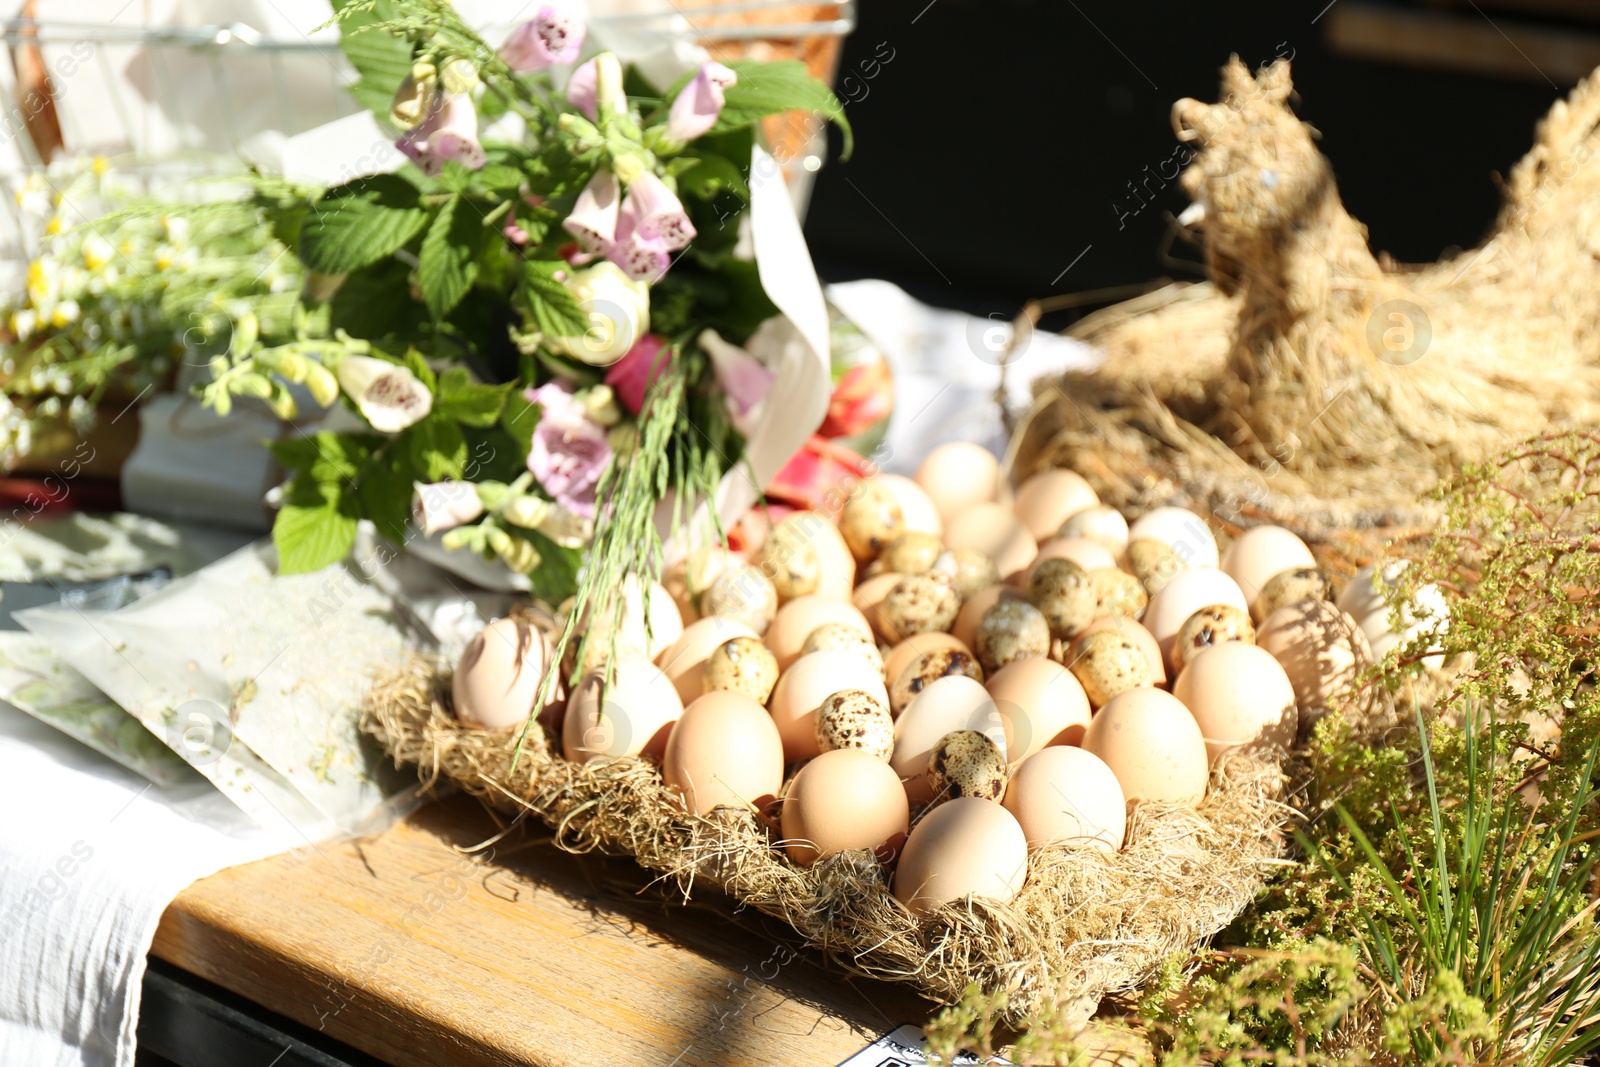 Photo of Quail and chicken eggs in container with straw on wooden table outdoors, closeup